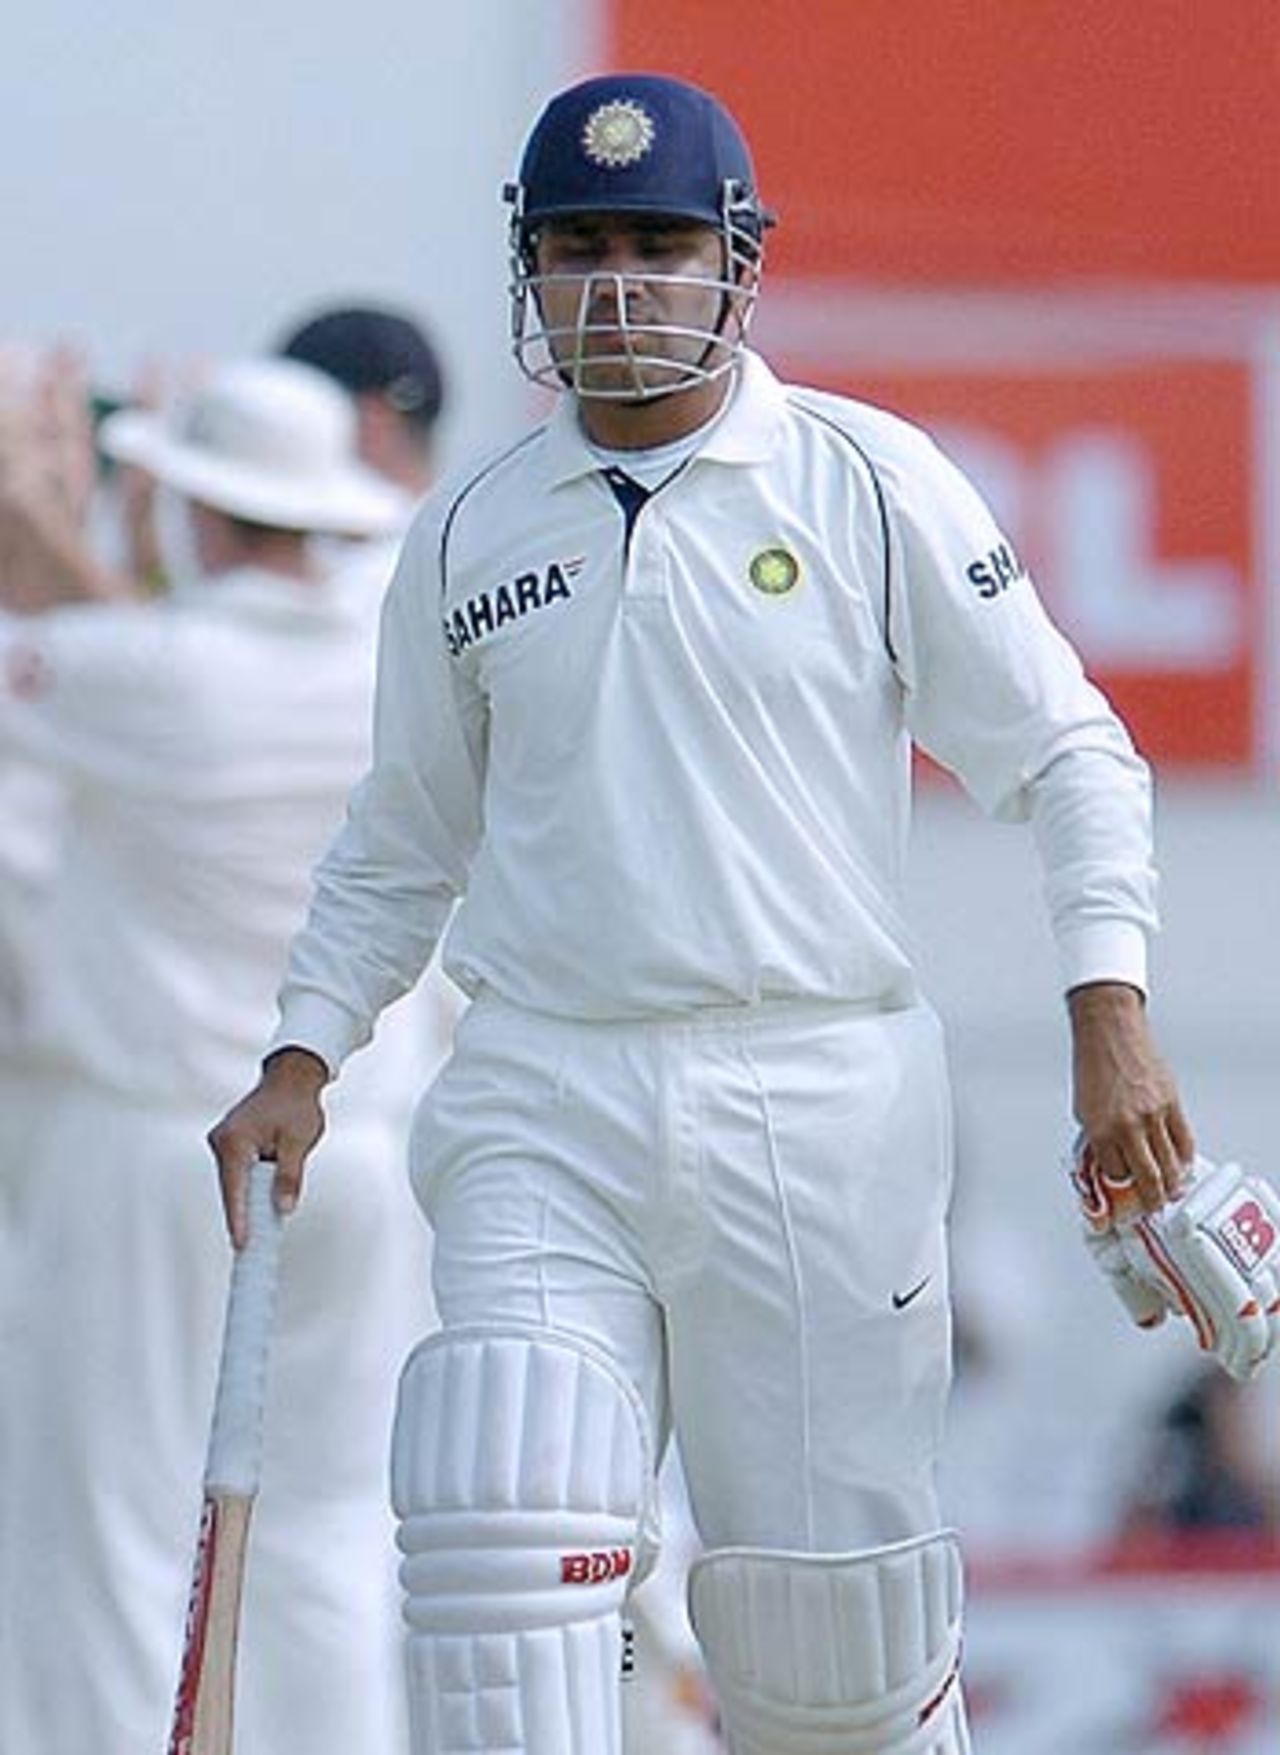 Virender Sehwag's poor match continued as he fell to Matthew Hoggard again, India v England, Nagpur, March 5, 2006